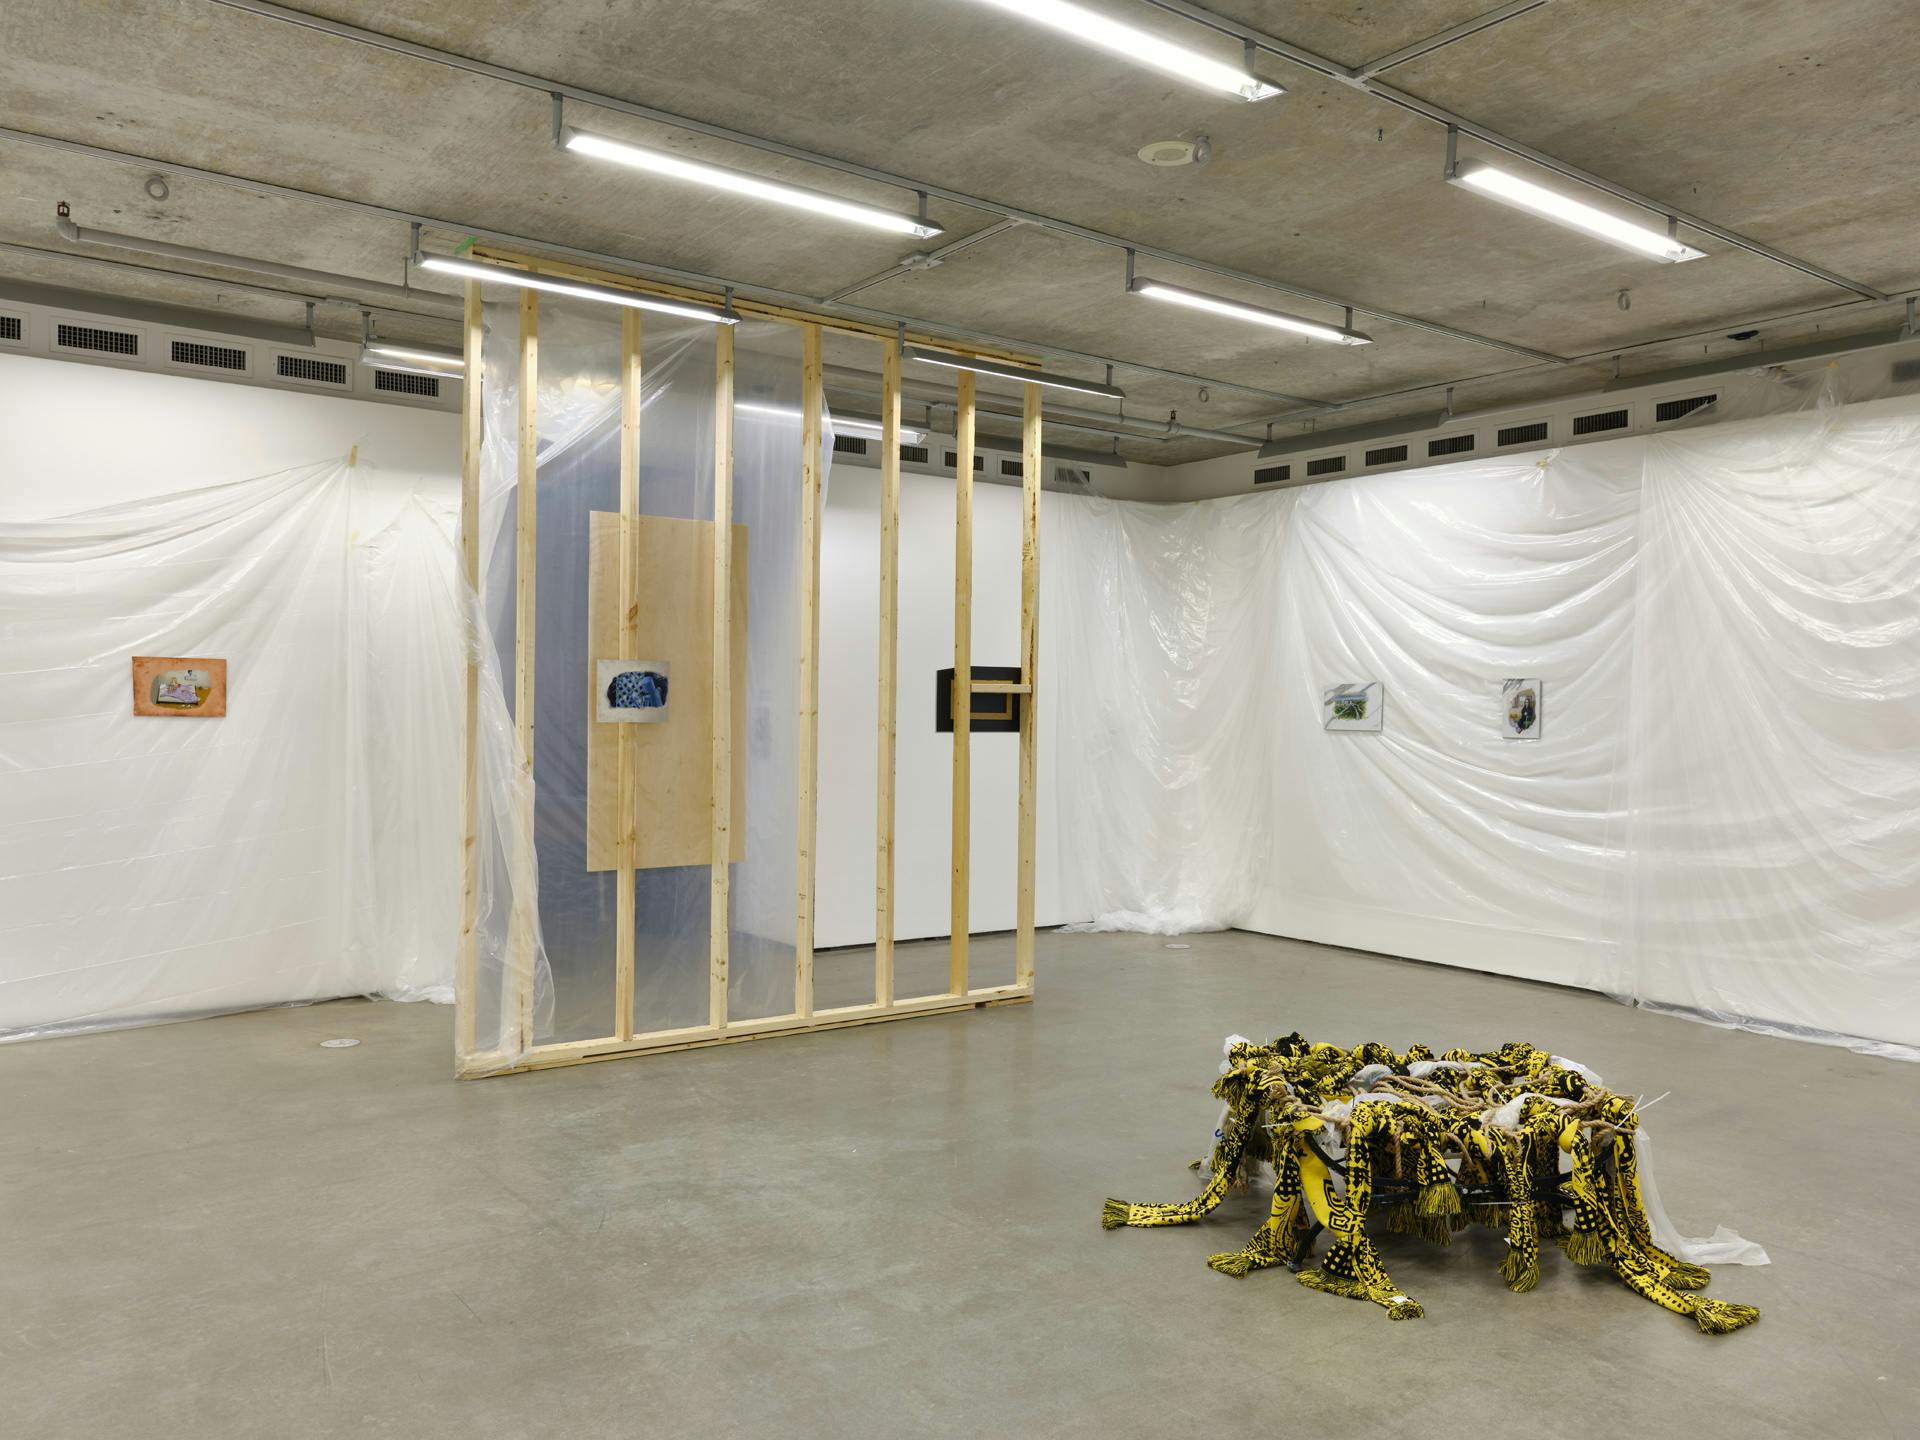 Small paintings hang on gallery walls draped with plastic sheets. At the entrance is an unfinished wall structure, paintings hang on either side of it. A sculpture made of textiles, plastic and rope sits on the floor. 